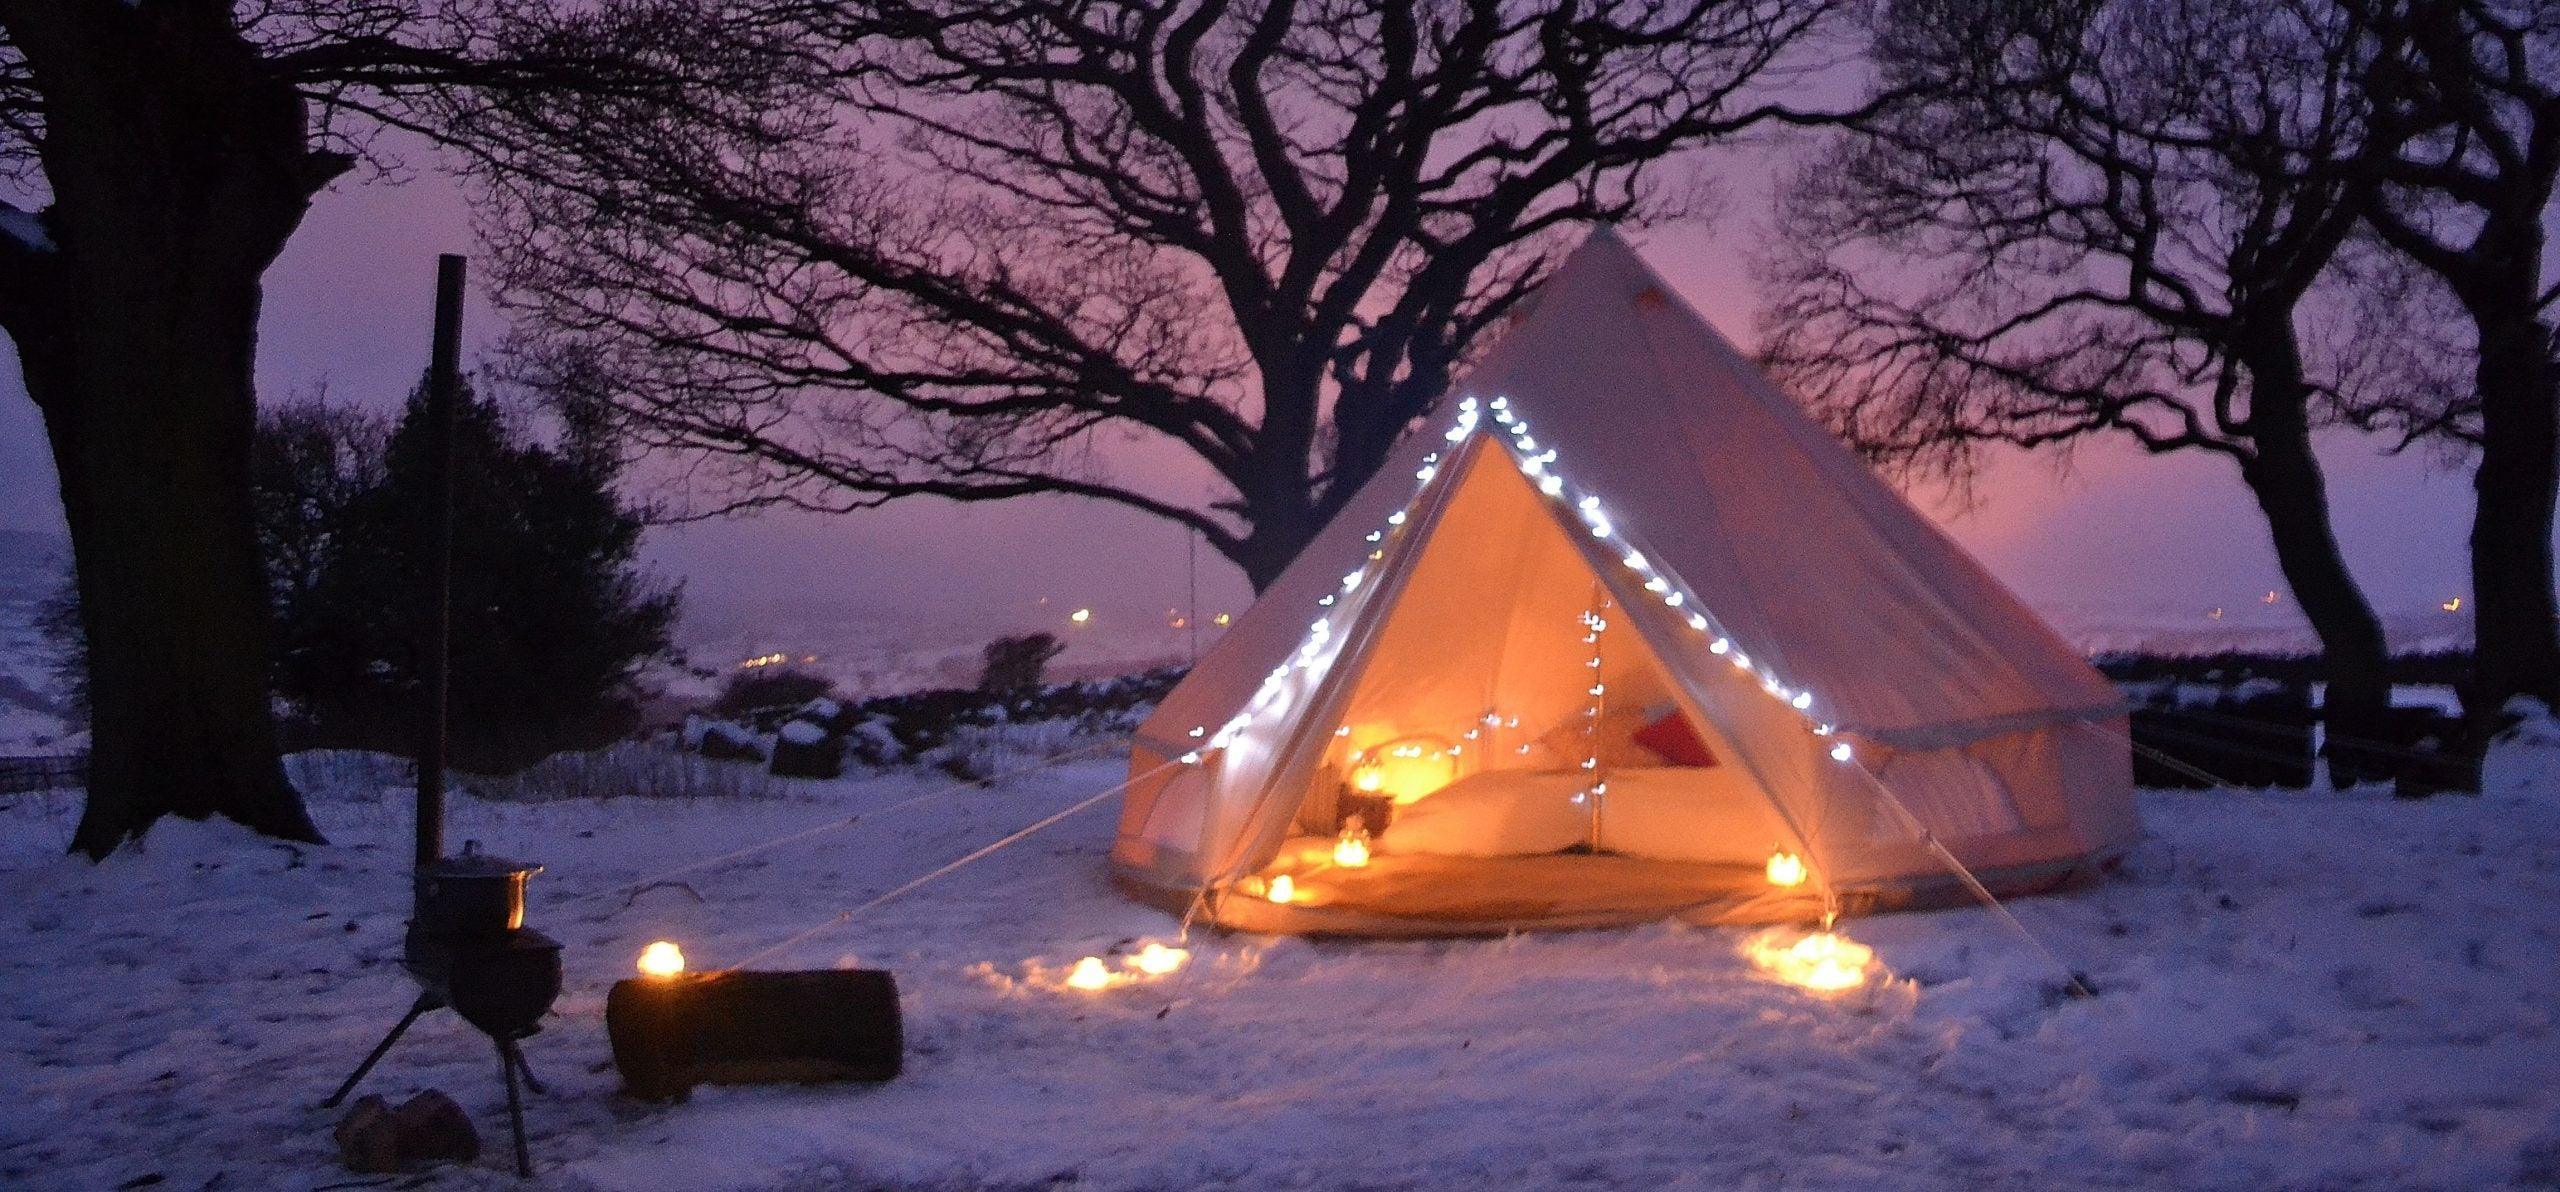 EXTREME WINTER CAMPING IN BELL TENTS! Tips to Survive the Night and Keep You Warm from Your Wild Winter Camping - Bell Tent Sussex